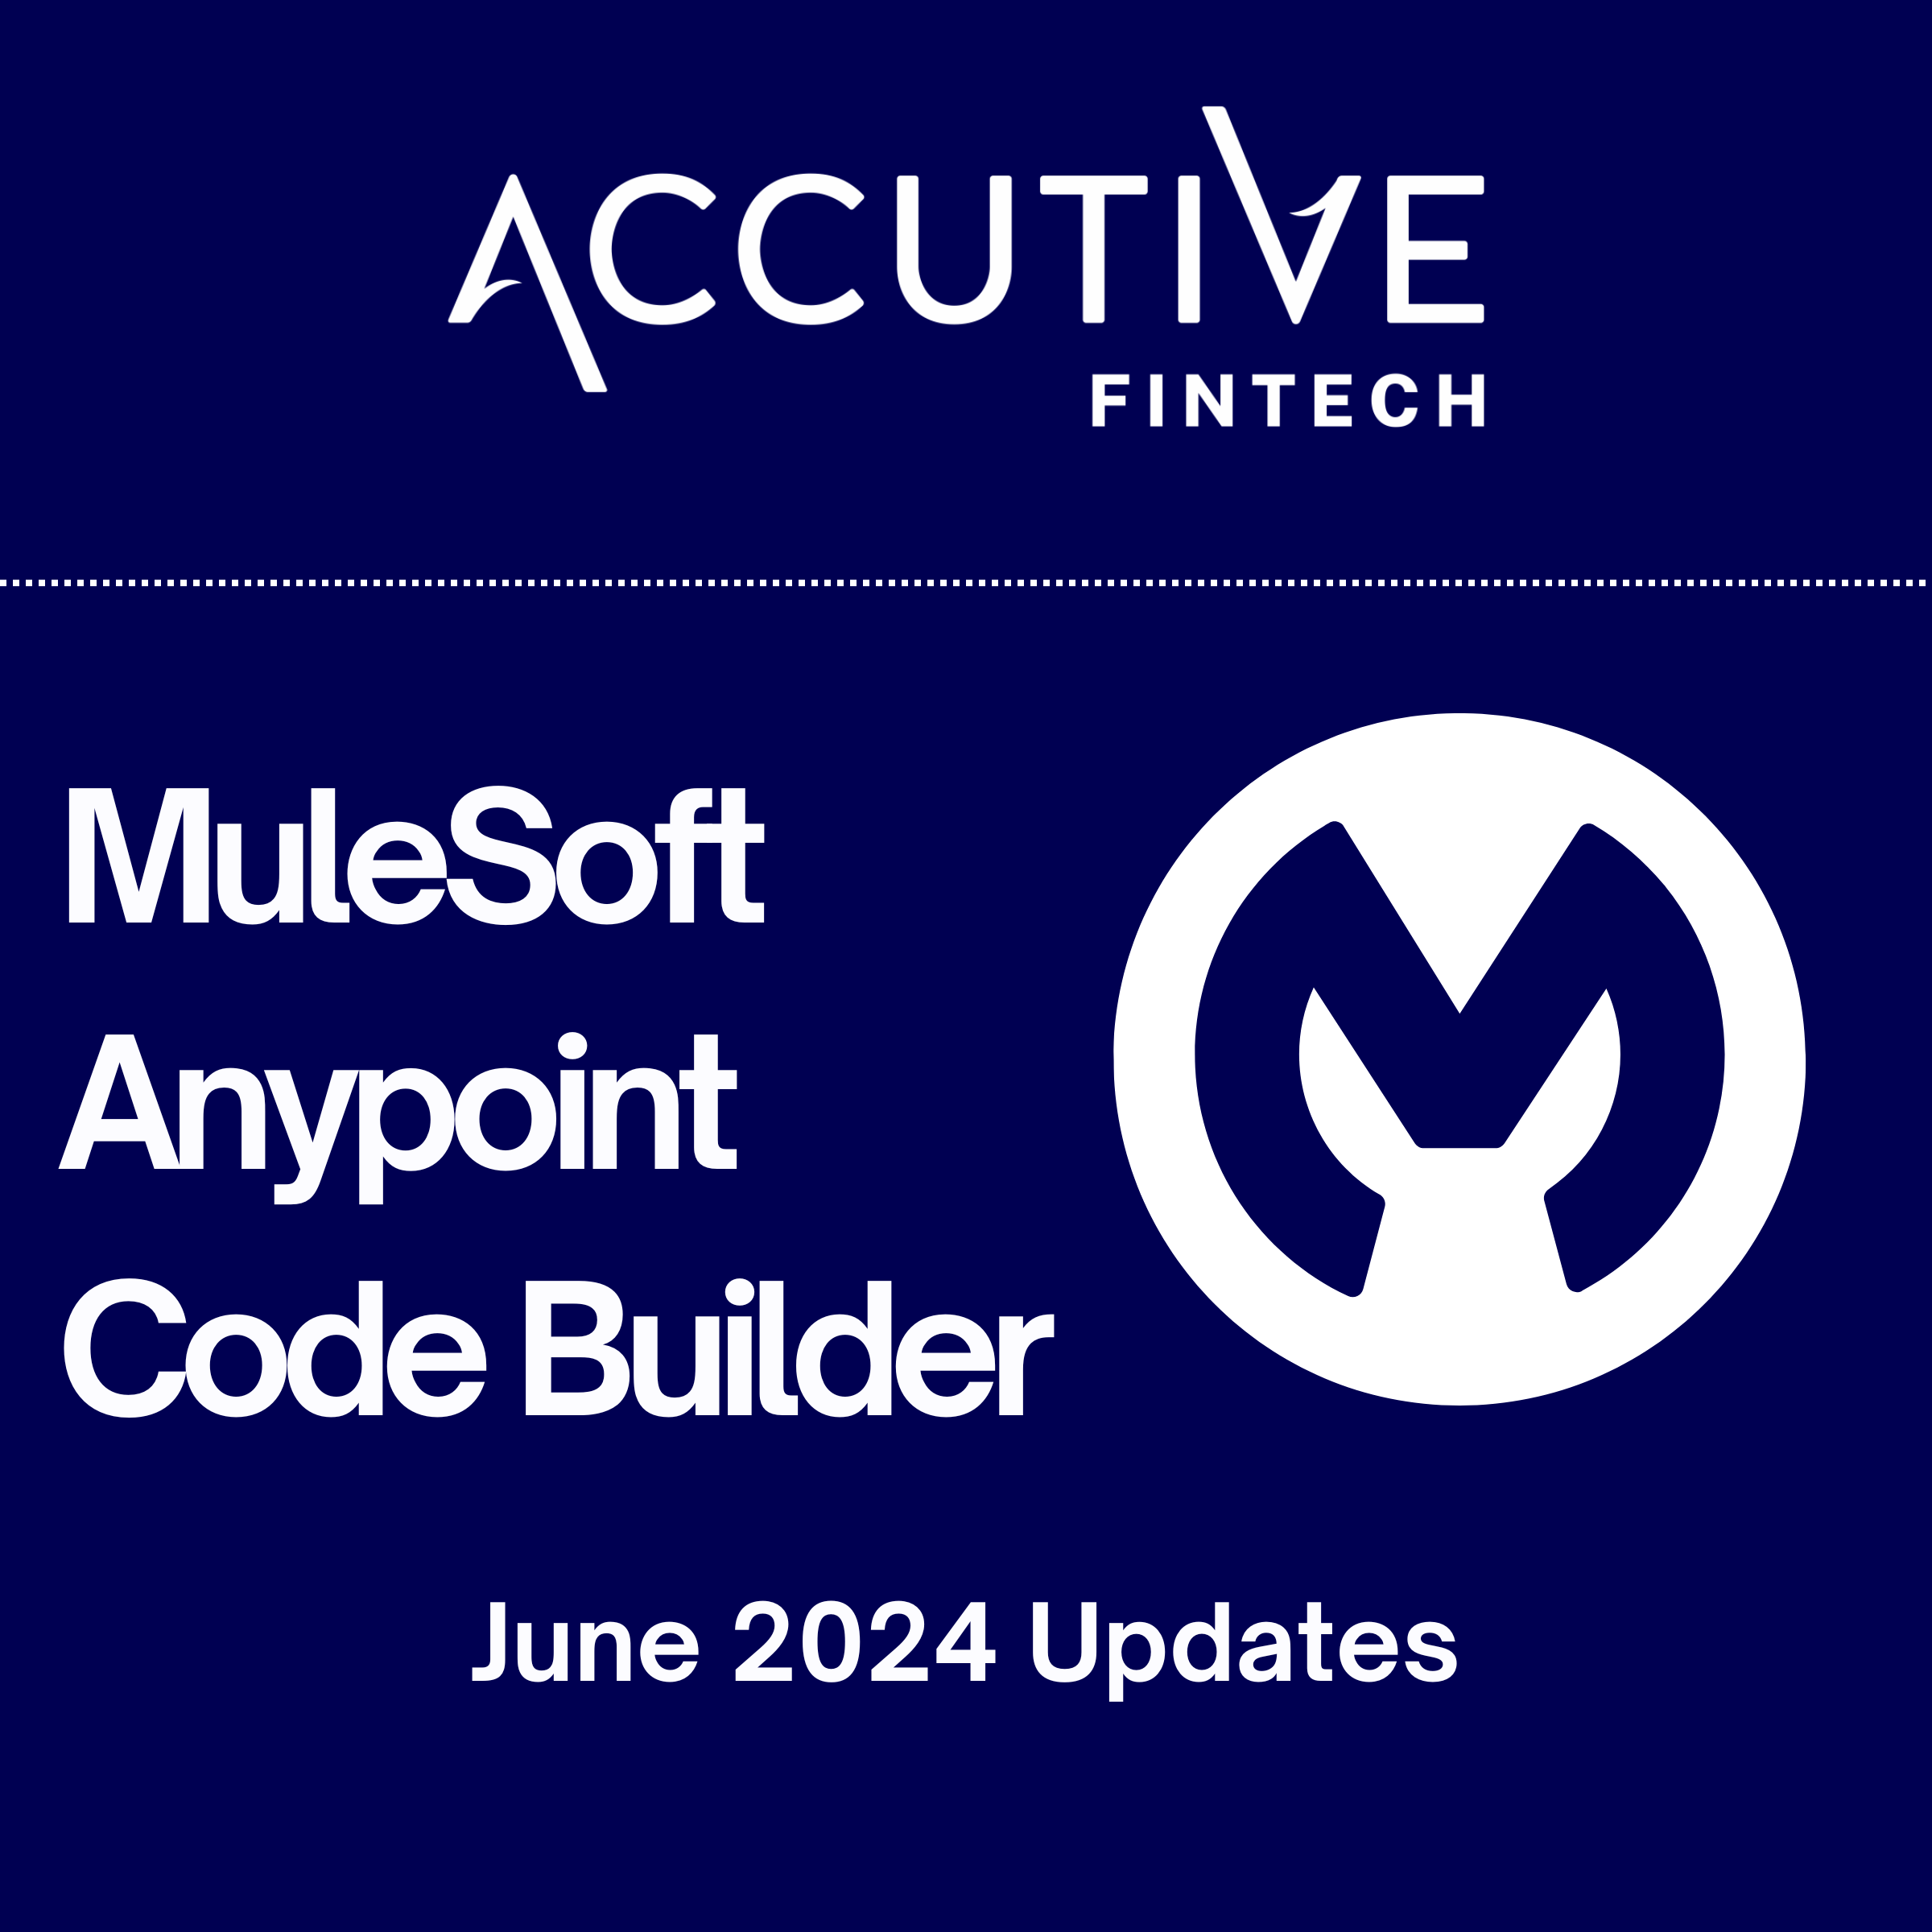 MuleSoft Anypoint Code Builder